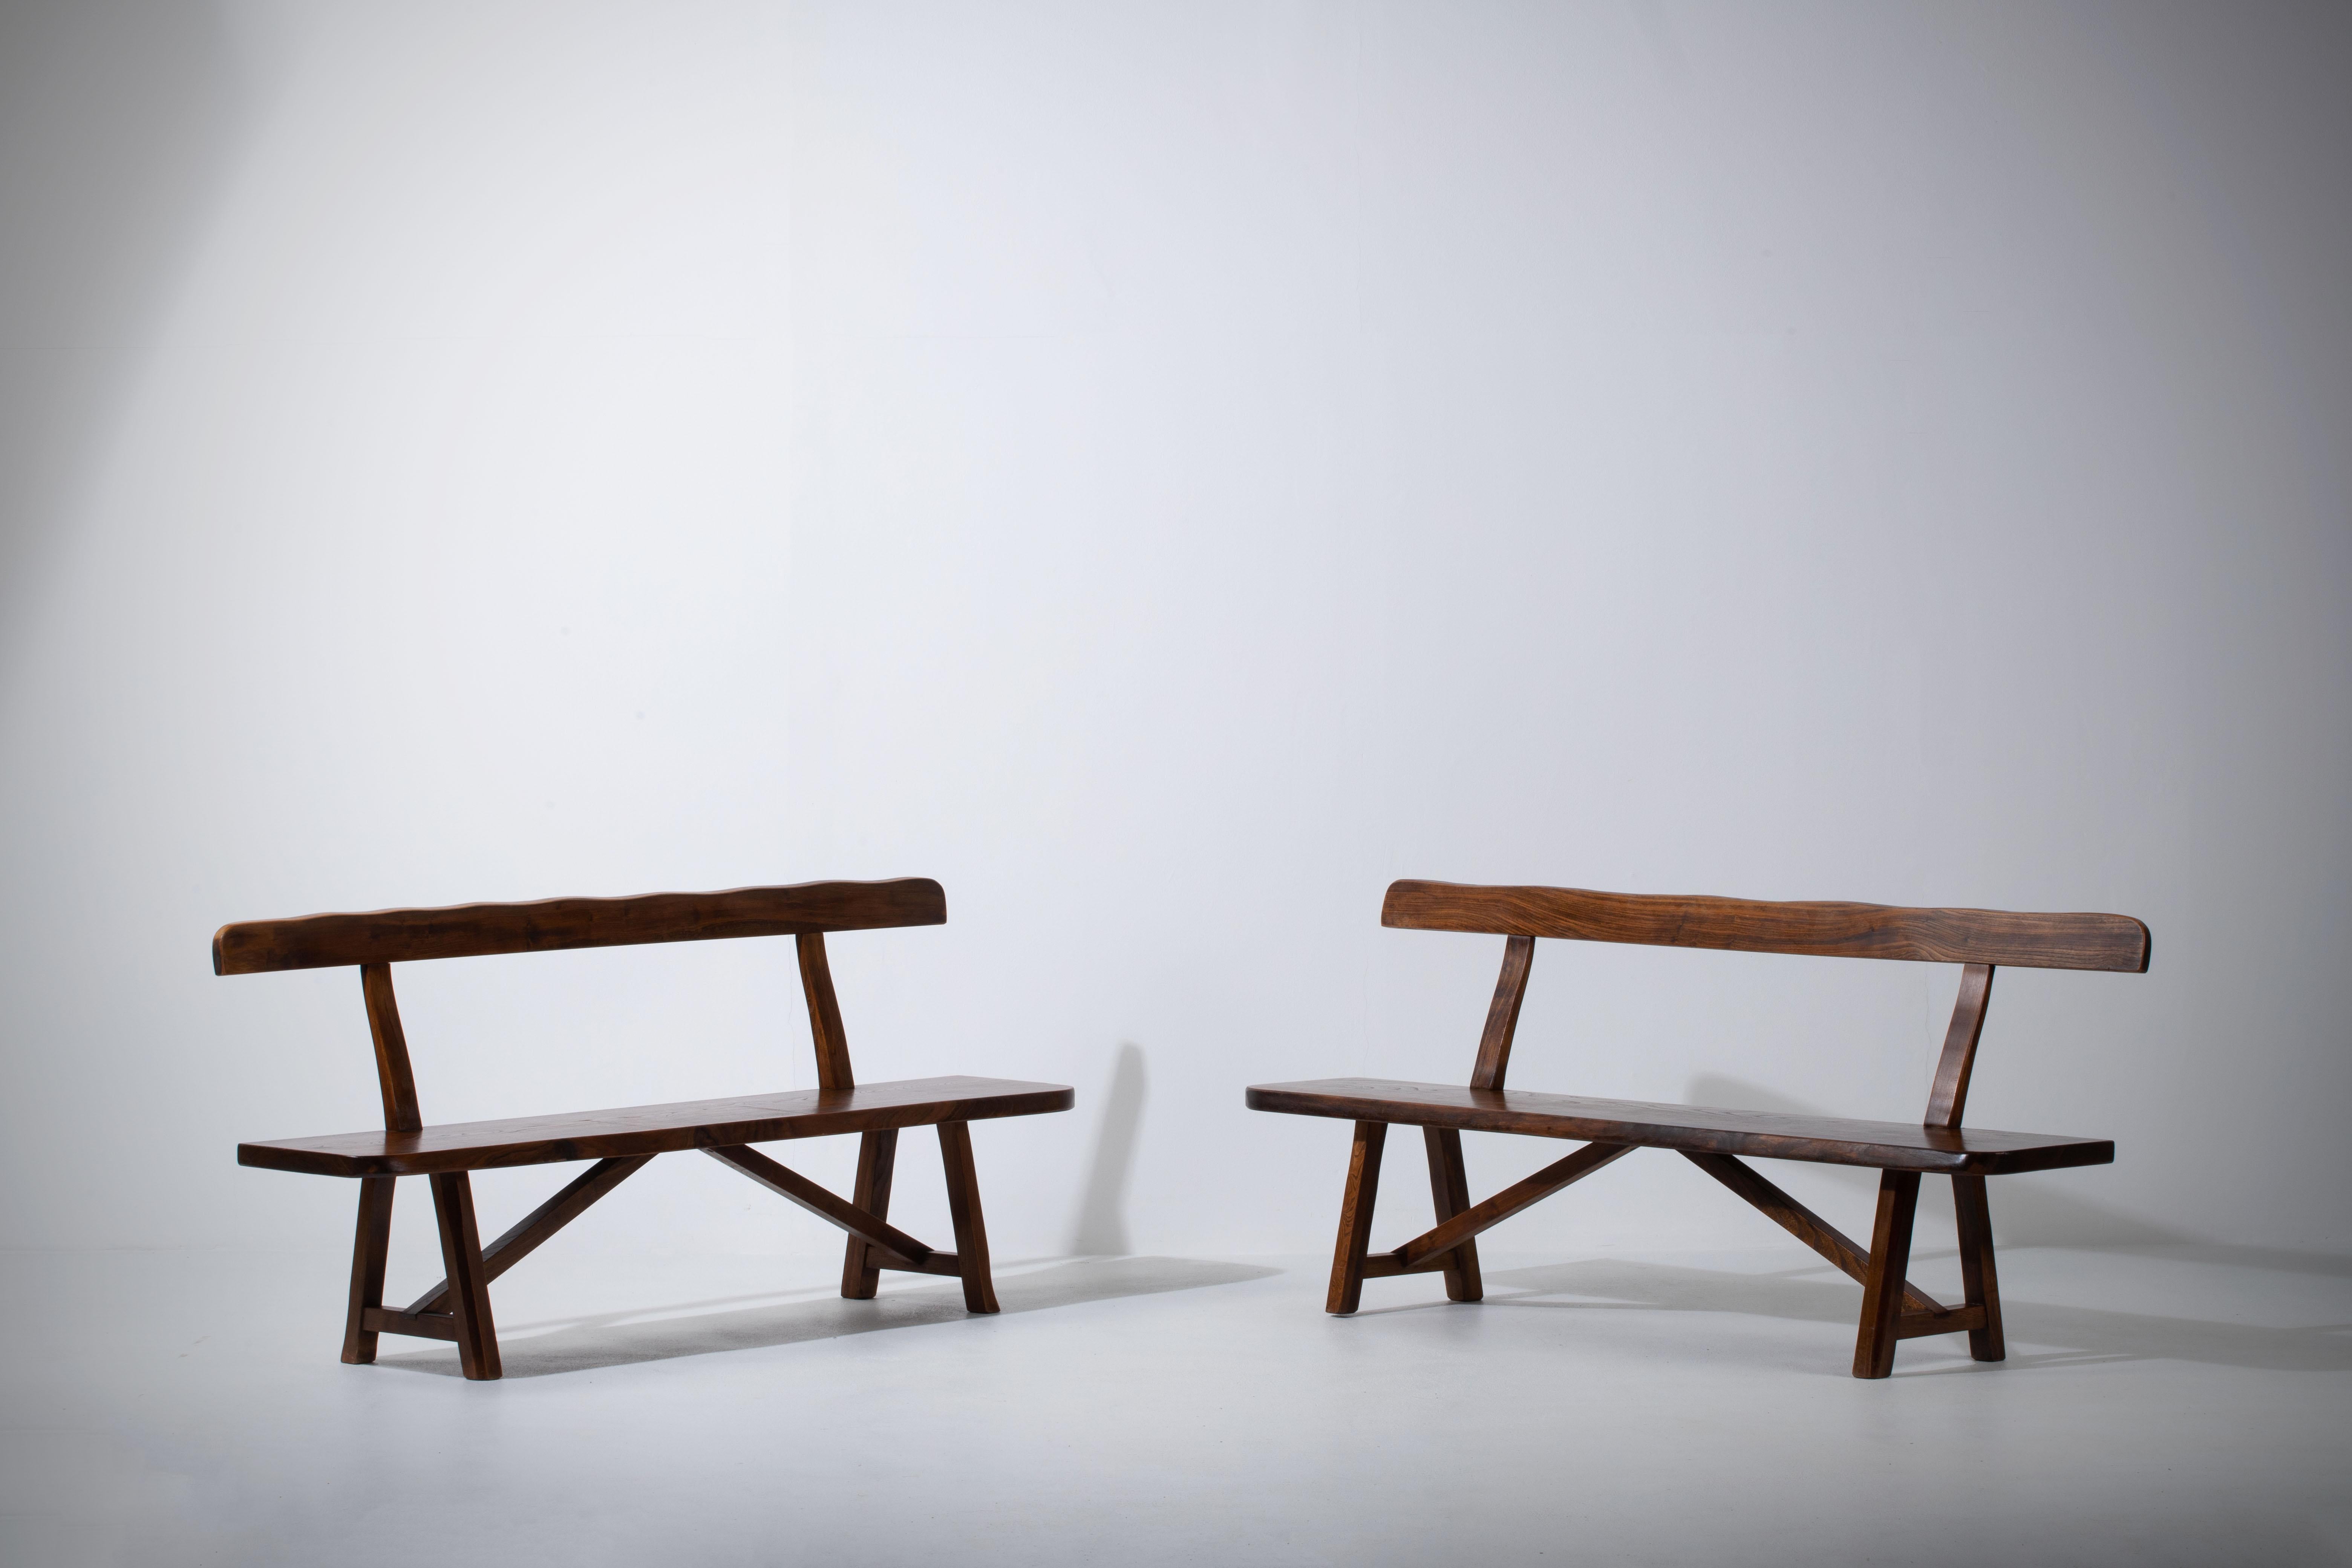 Brutalist elm T bench formerly attributed to Olavi Hanninen, but manufactured by the Aranjou company in Angers, France in the 1960s.